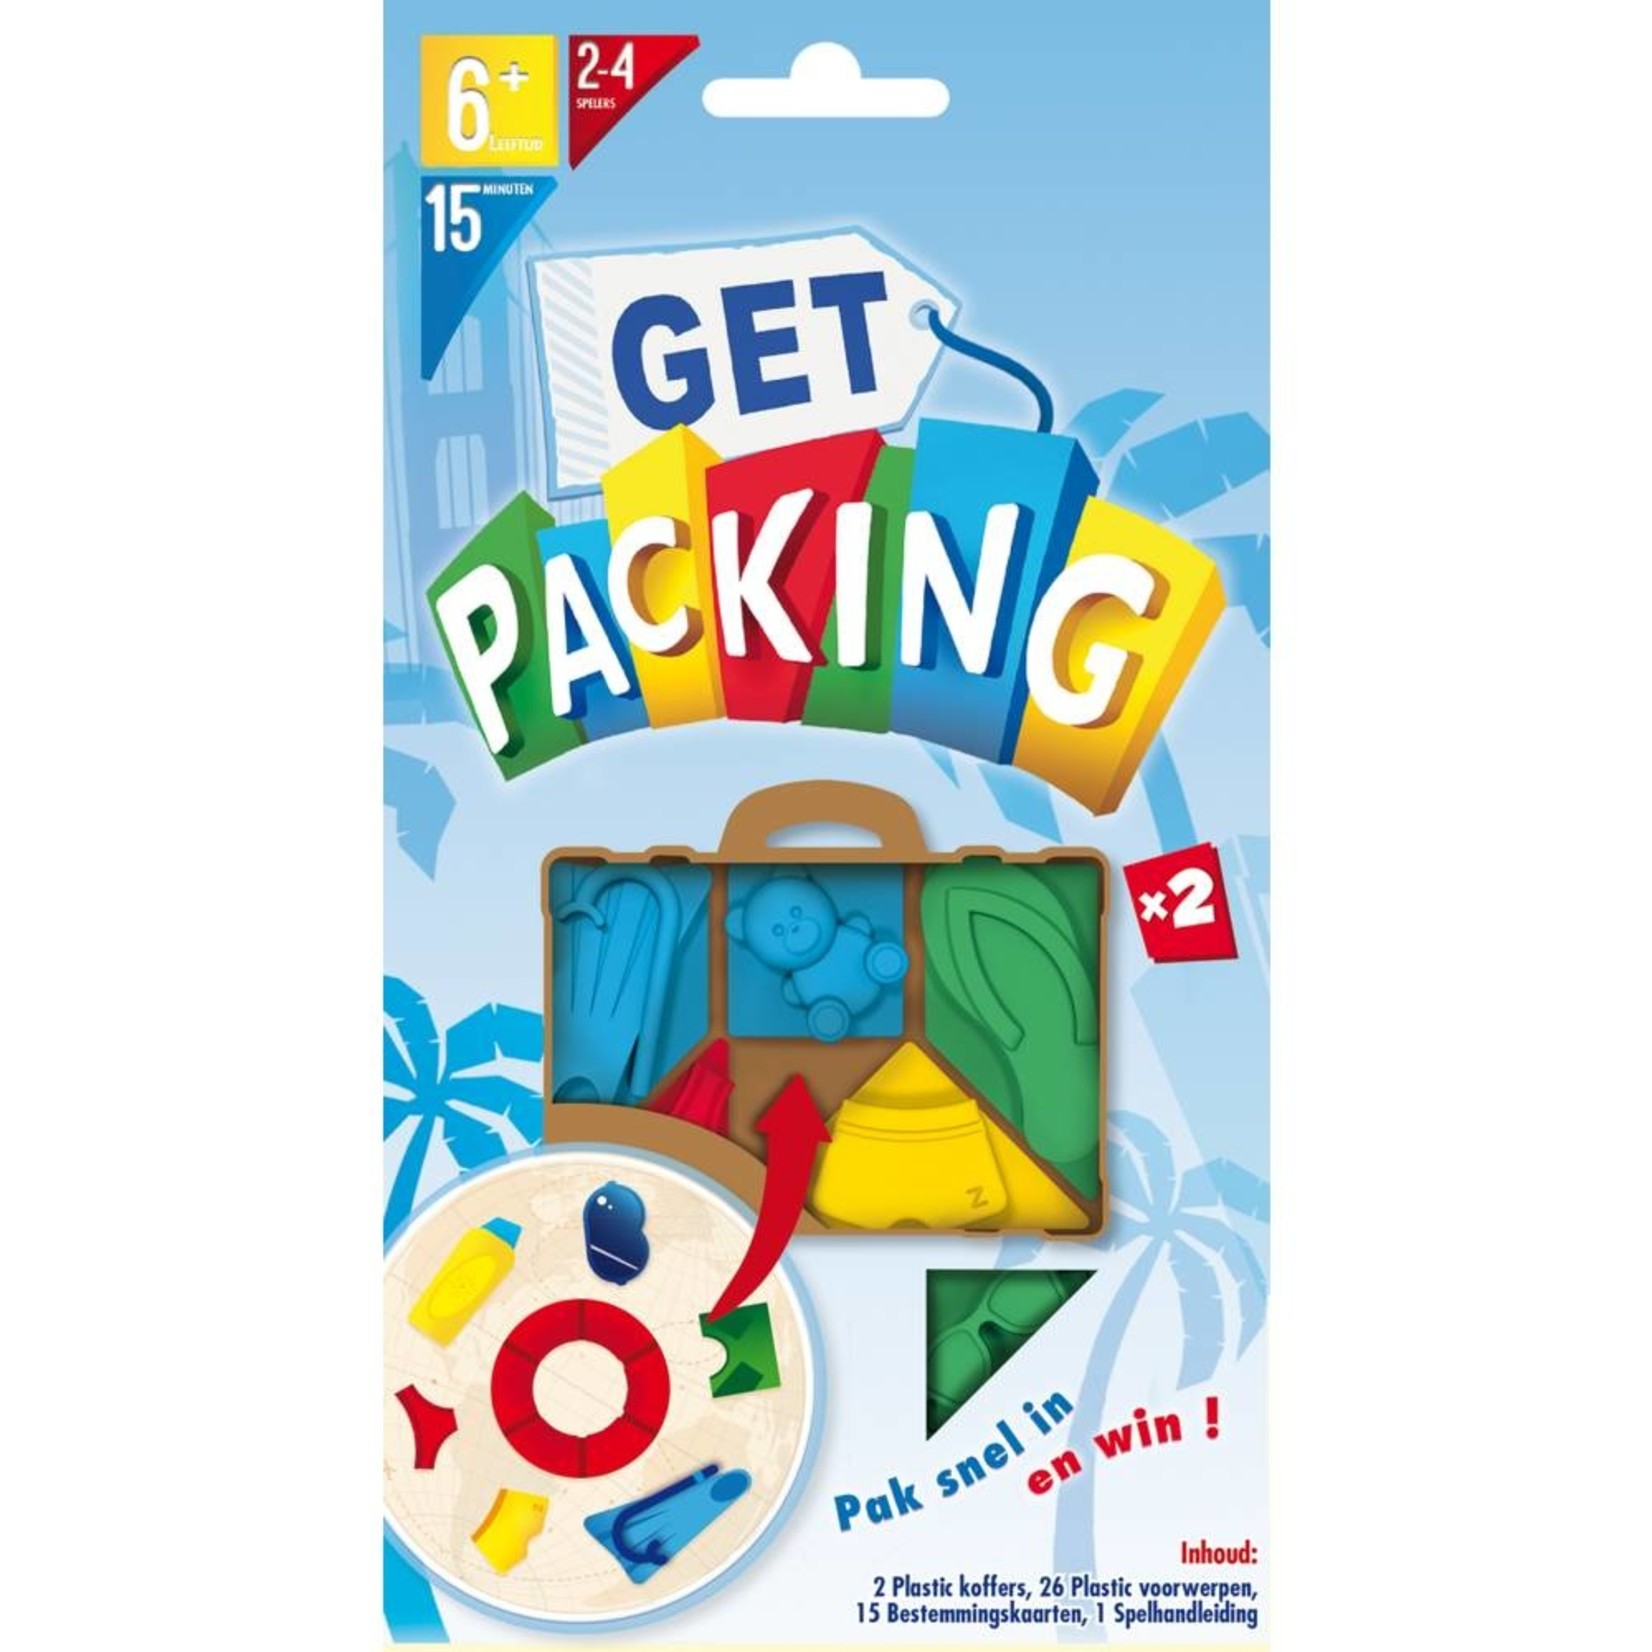 Get Packing: 2 Player